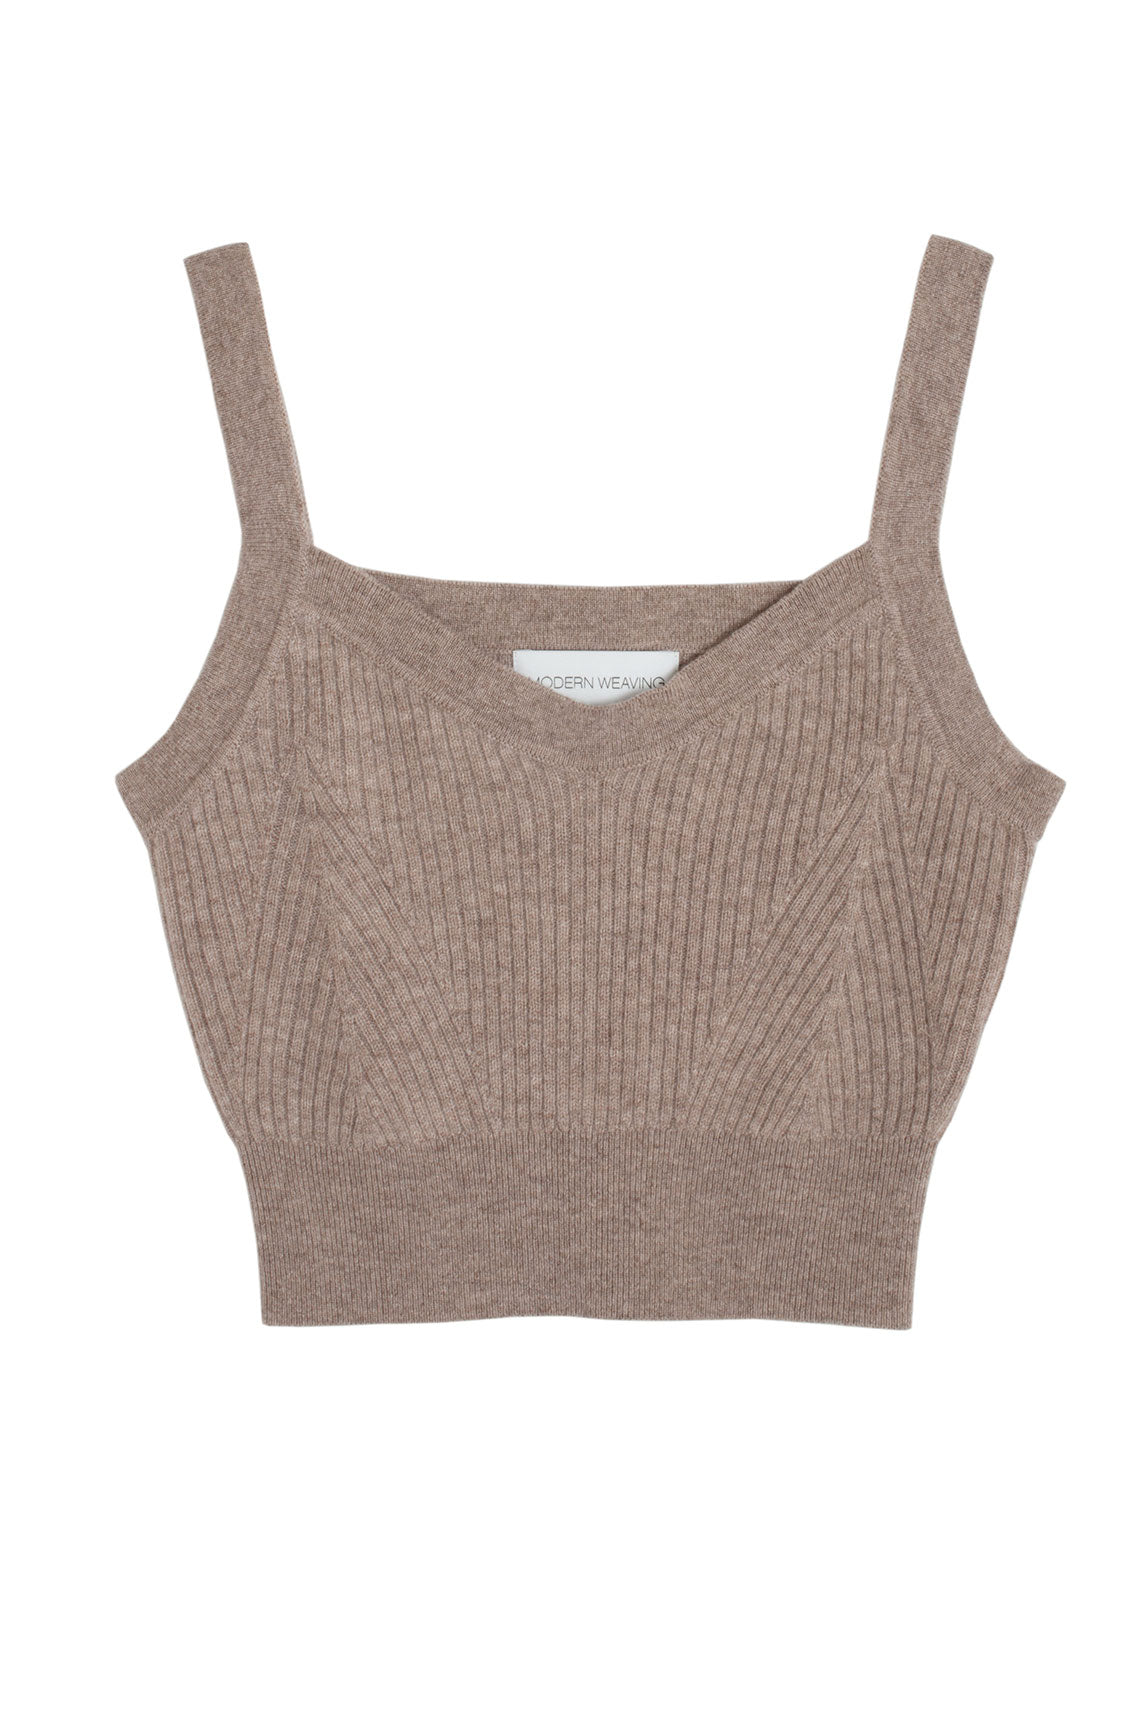 Taupe Mongolian Cashmere Bralette